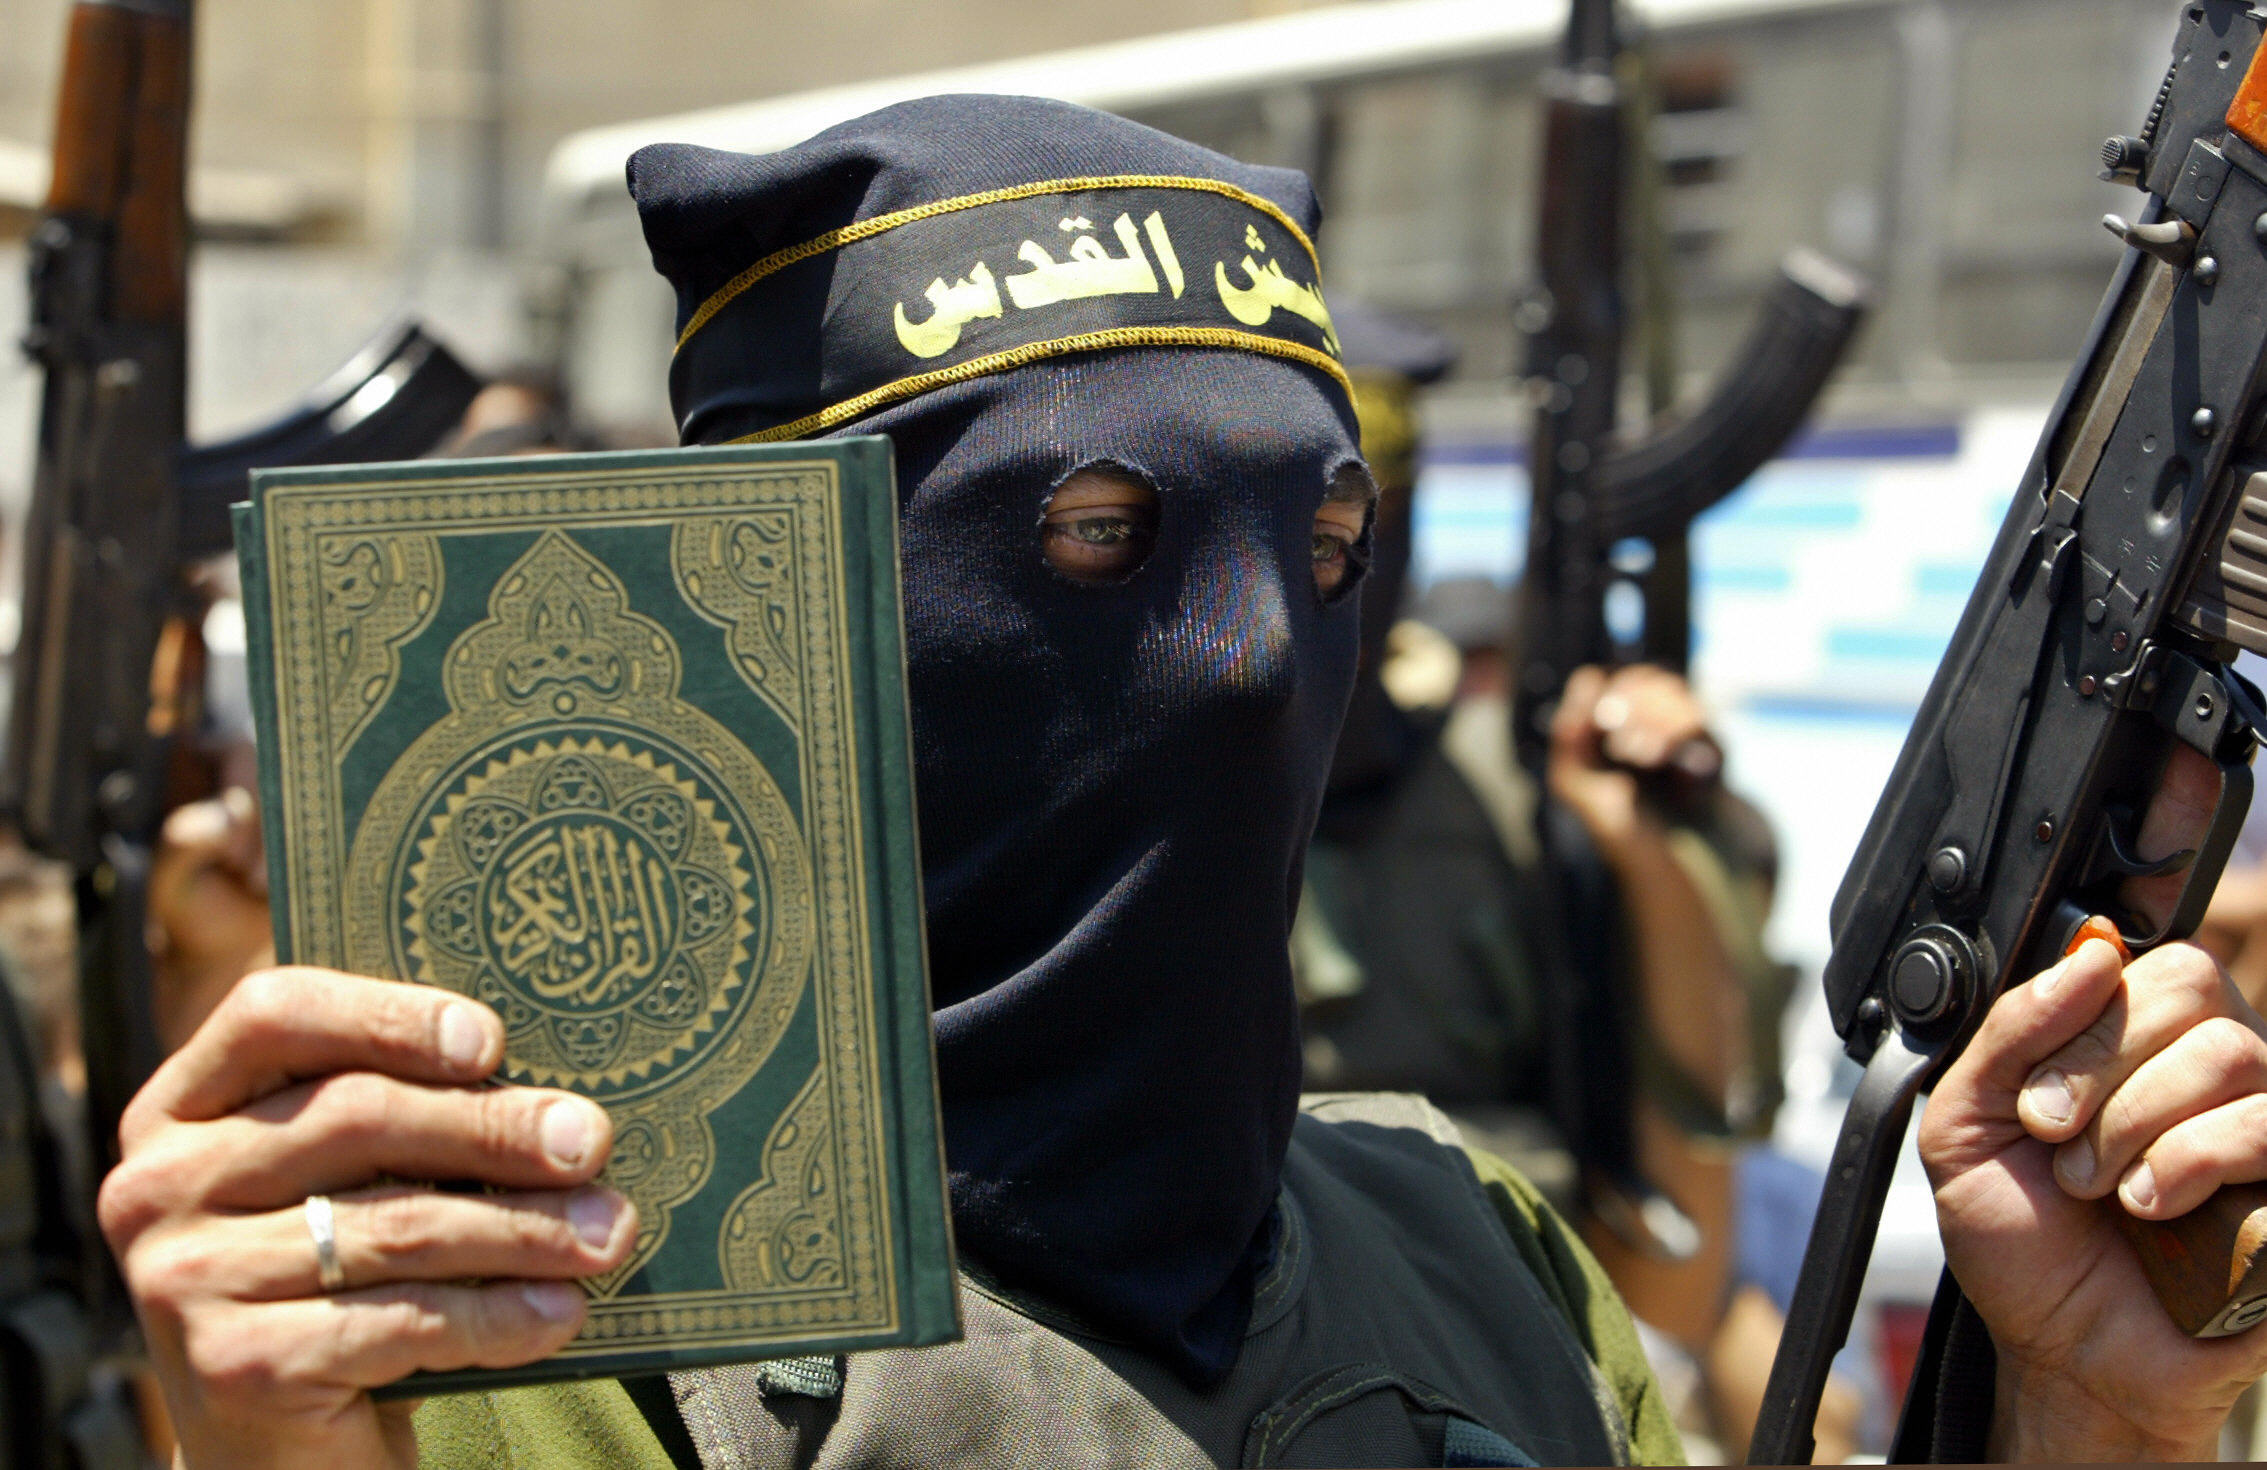 An Islamic Jihad militant holds up a copy of the Koran in one hand and an automatic rifle in the other during a rally in Beit Lahia in the northern Gaza Strip, 10 June 2005. (MOHAMMED ABED/AFP/Getty Images)